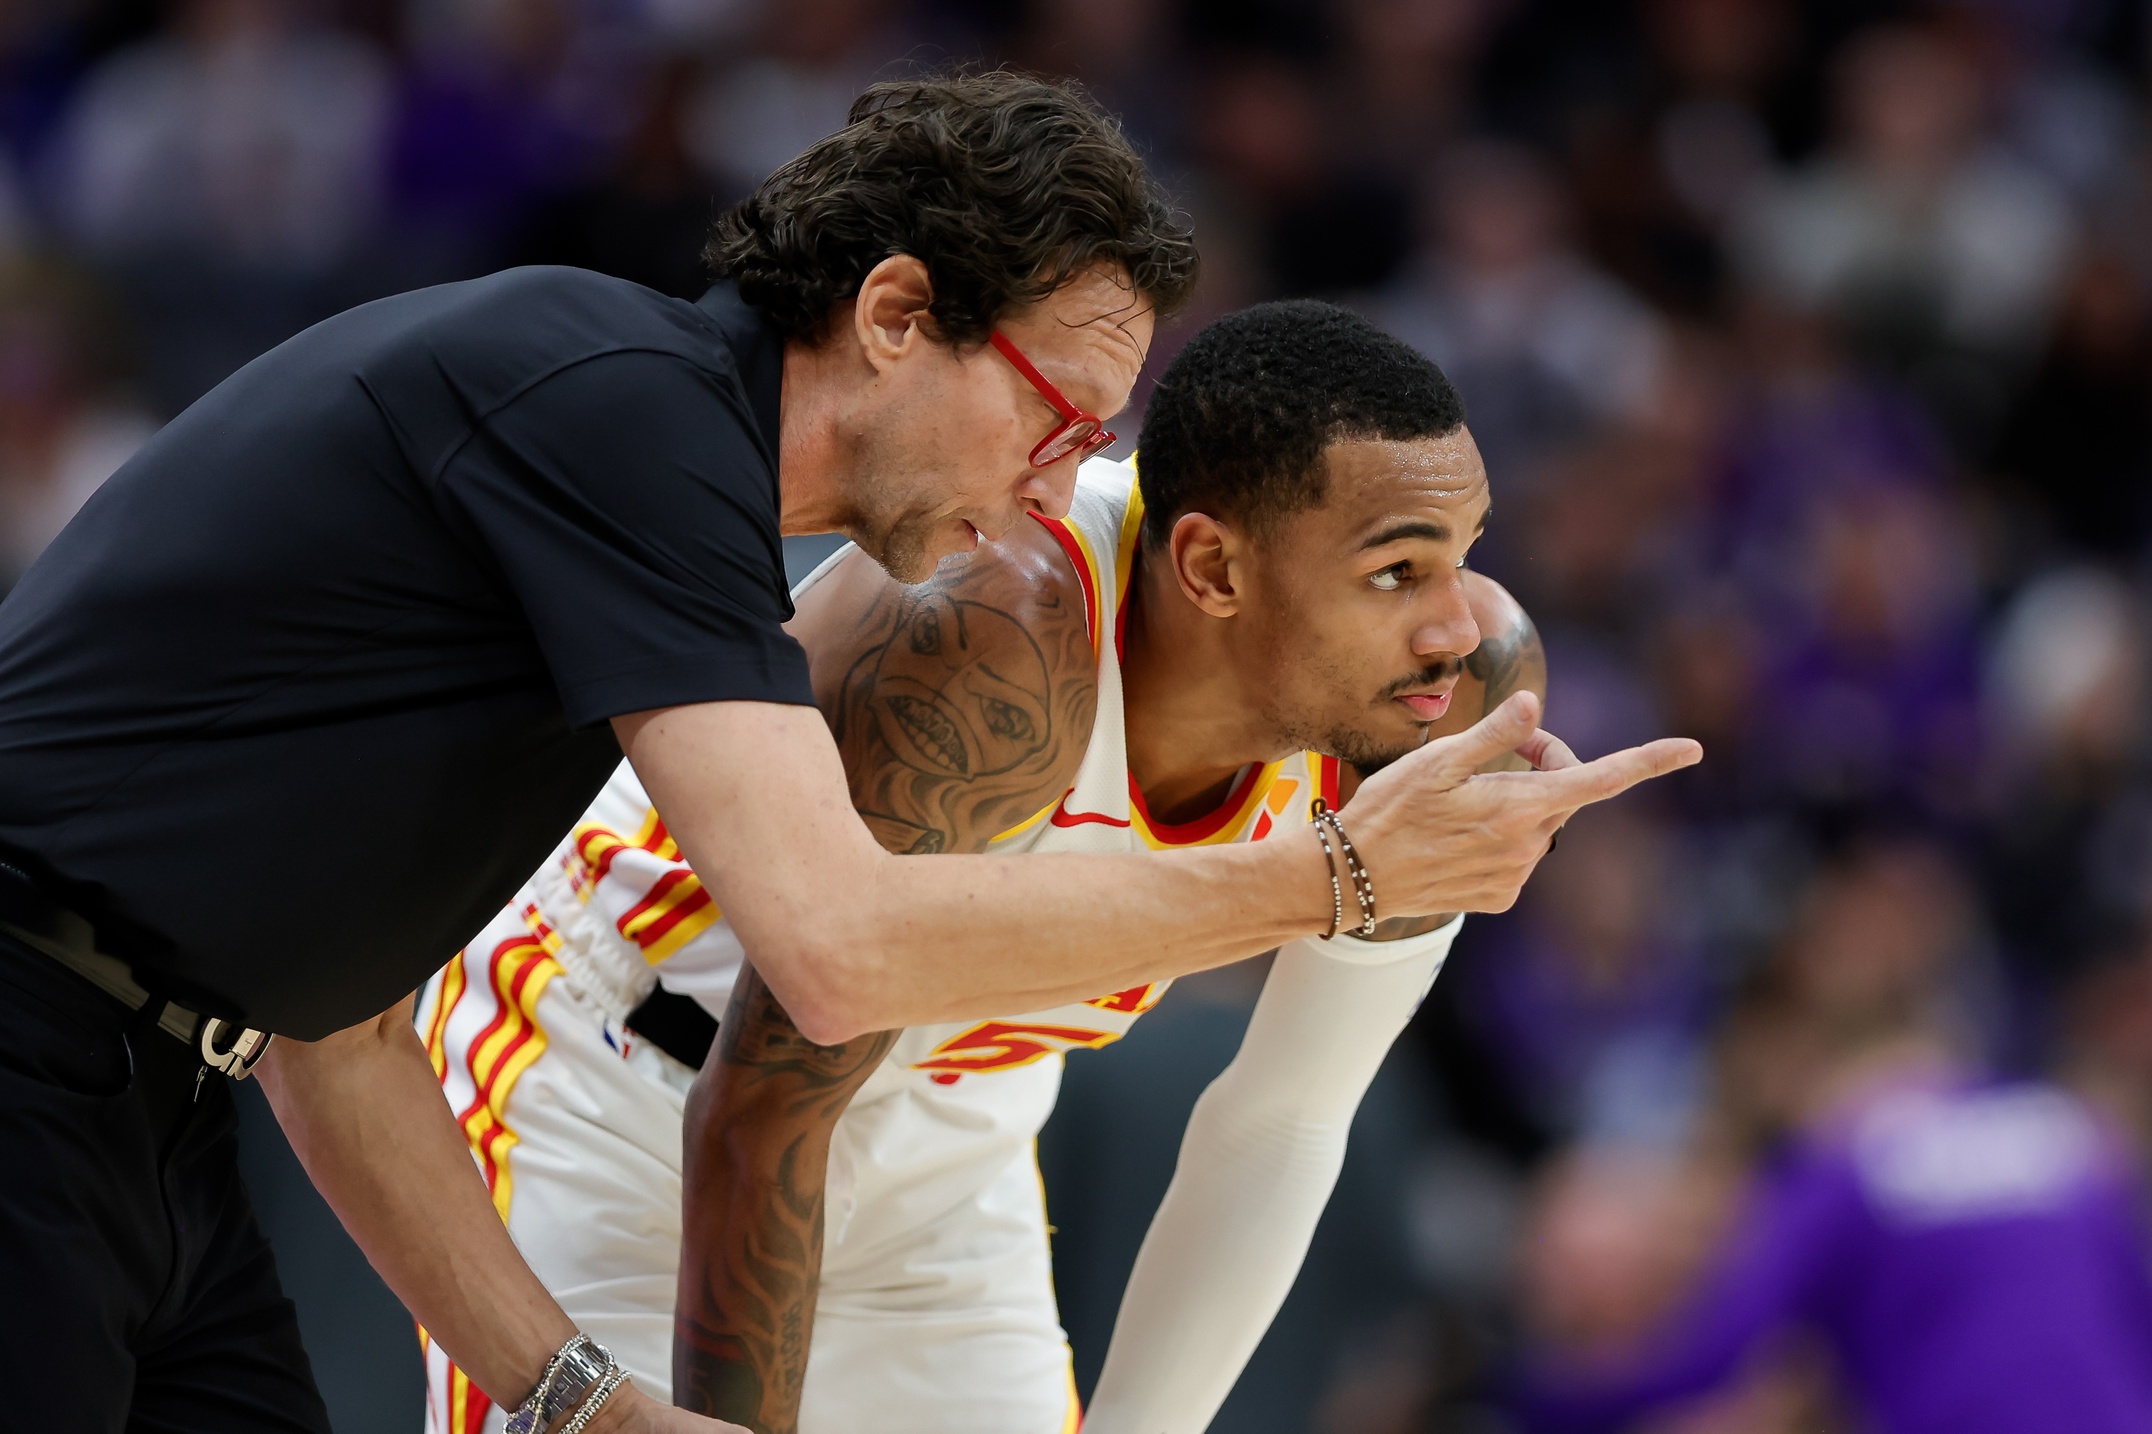 Atlanta Hawks guard Dejounte Murray (5) is instructed by head coach Quin Snyder during the third quarter against the Sacramento Kings at Golden 1 Center.